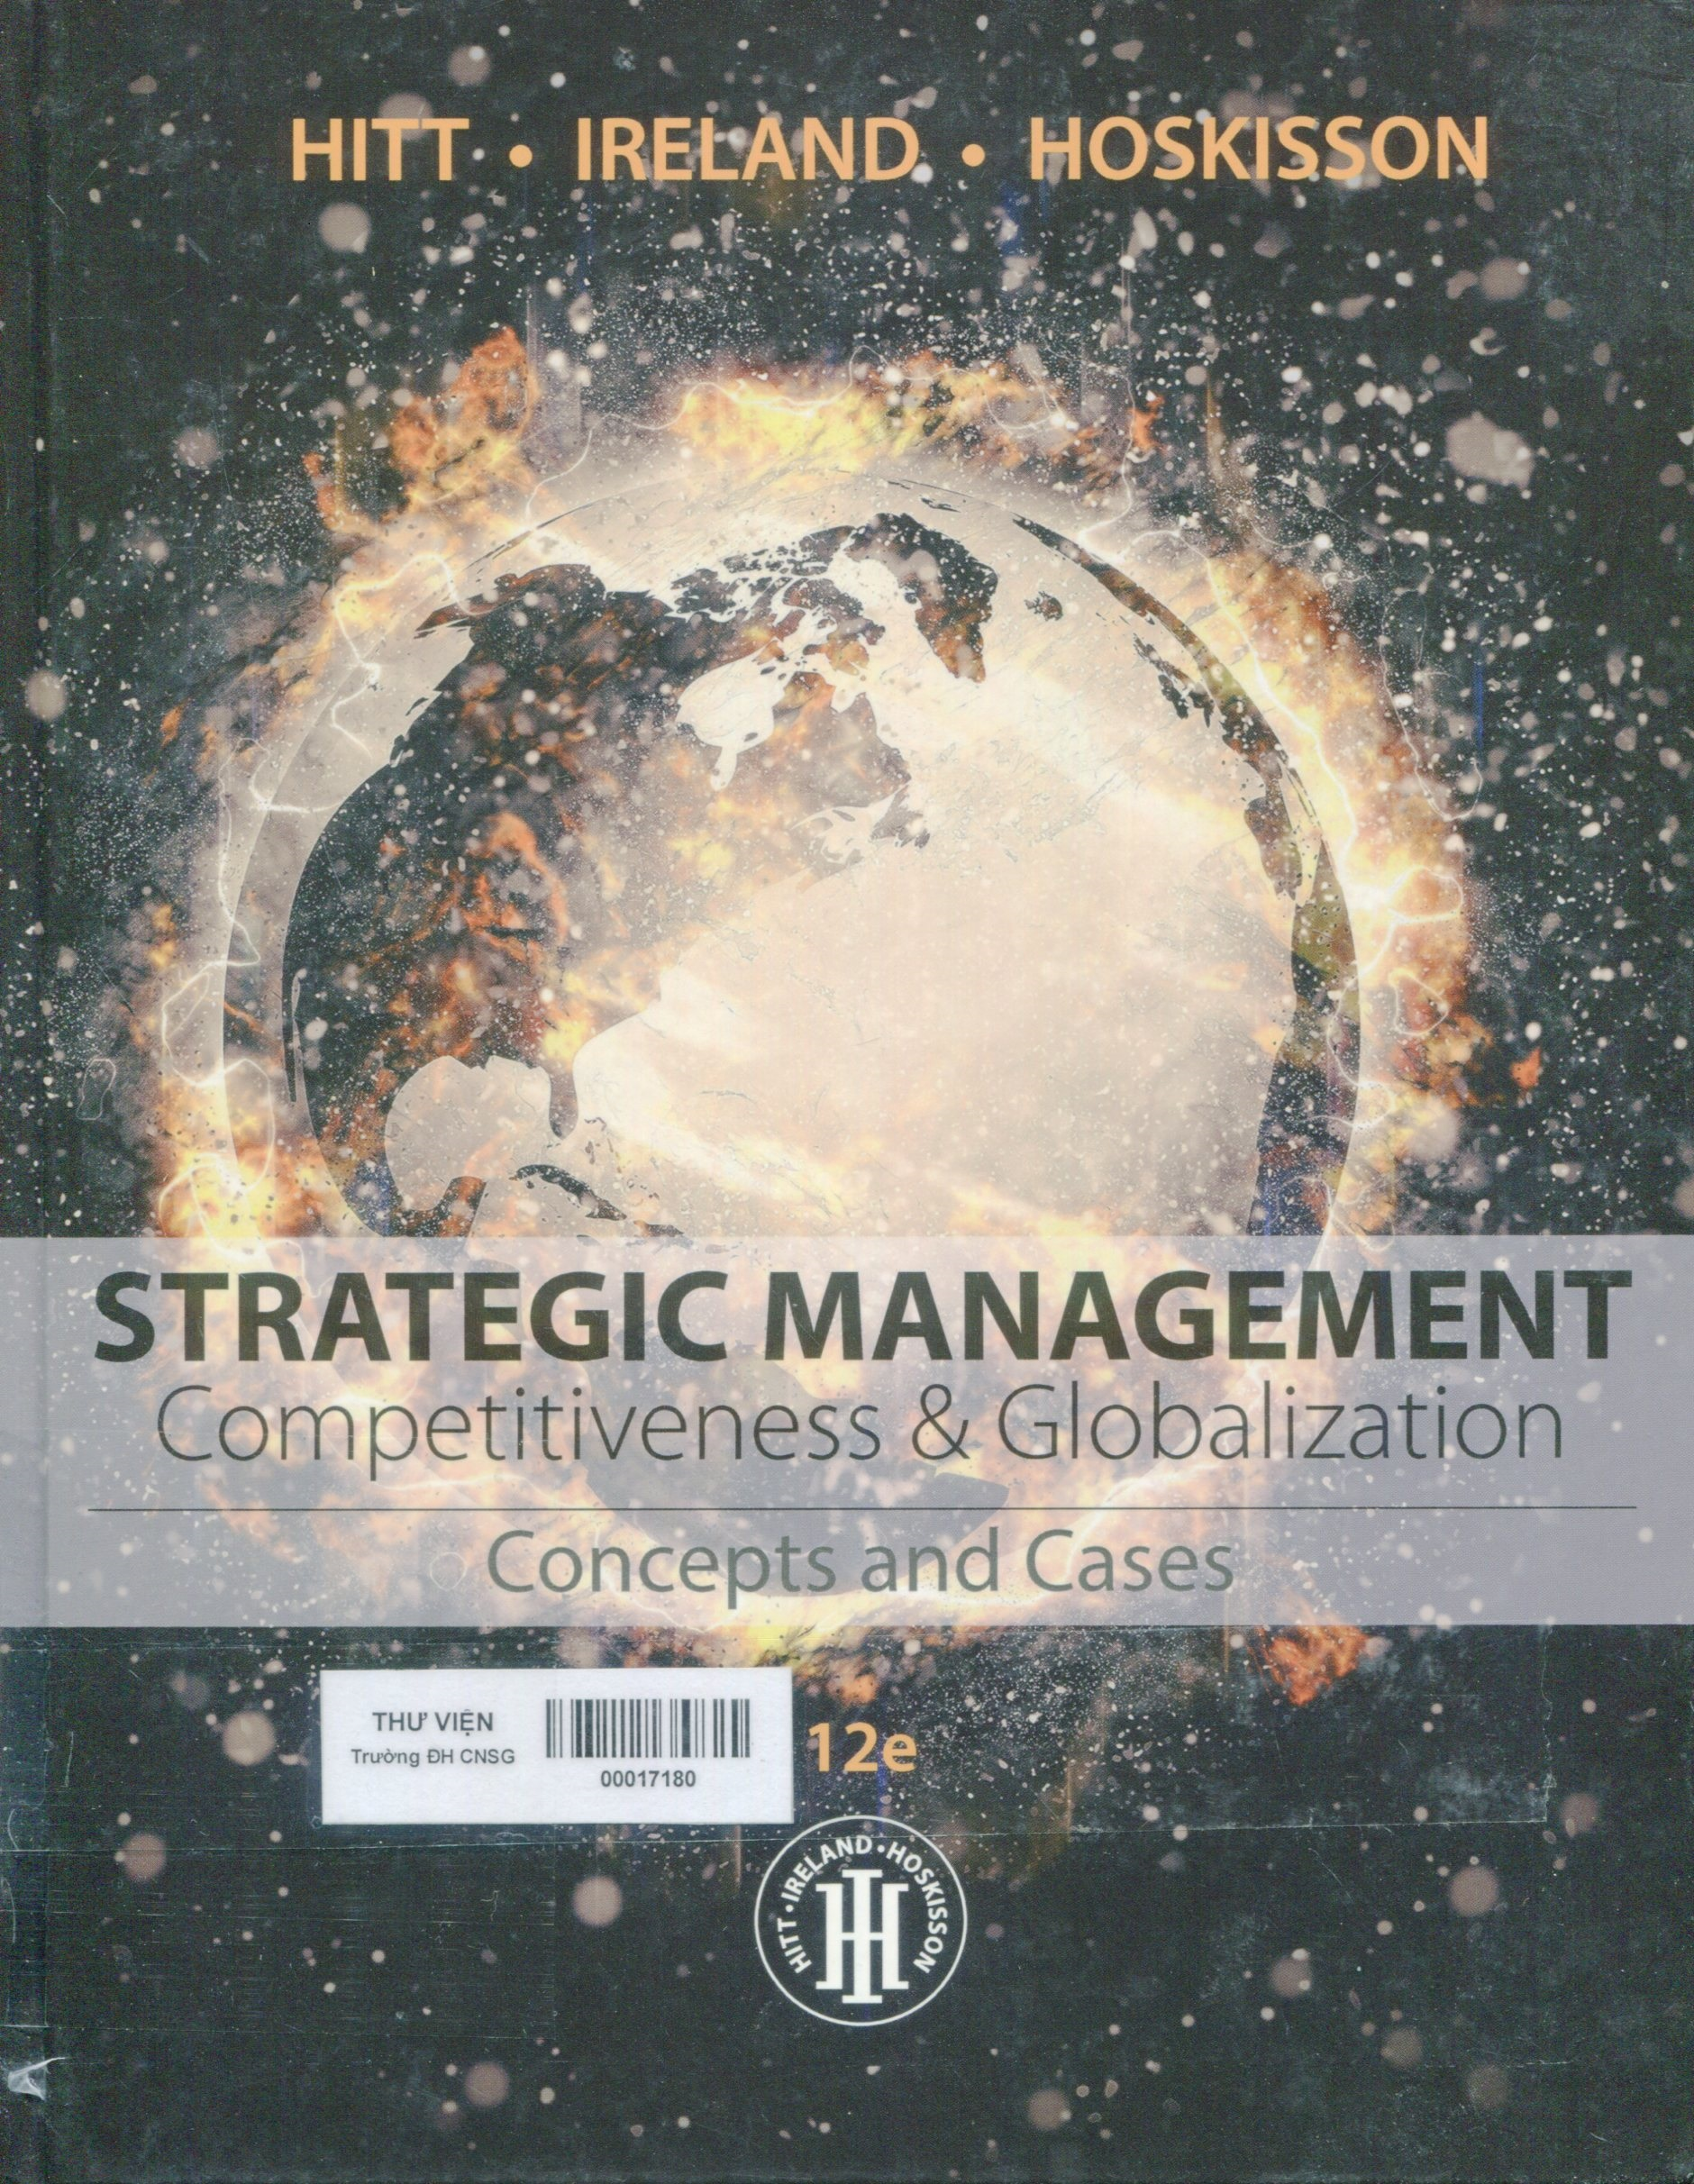 Strategic management : Competitiveness & globalization Concepts and cases